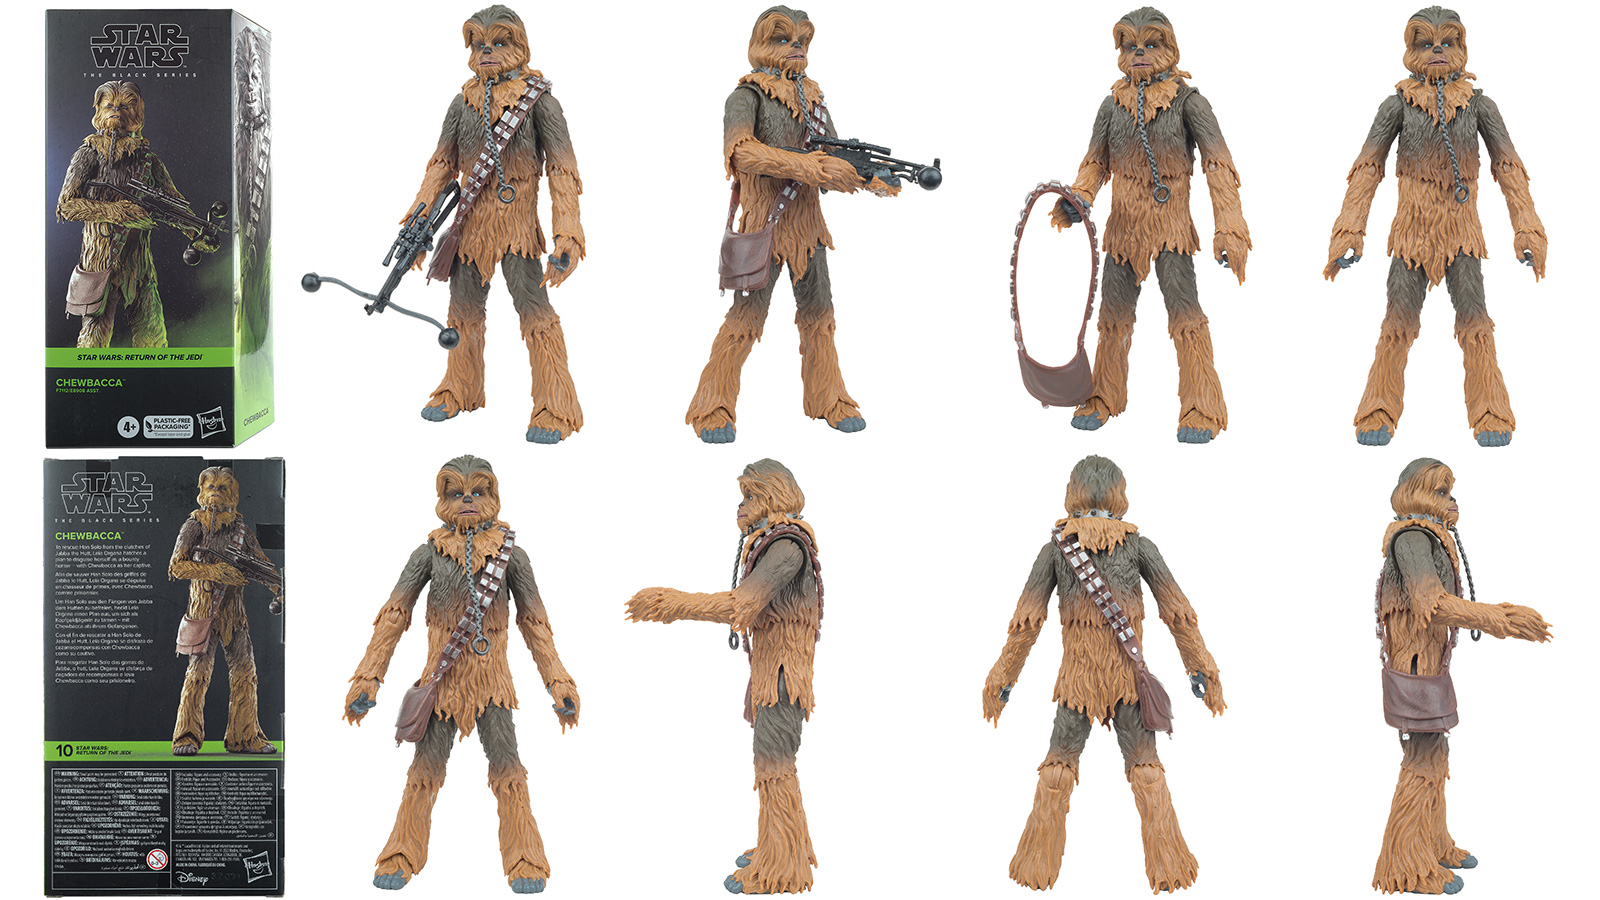 New Photos - The Black Series 6-Inch 10: Chewbacca